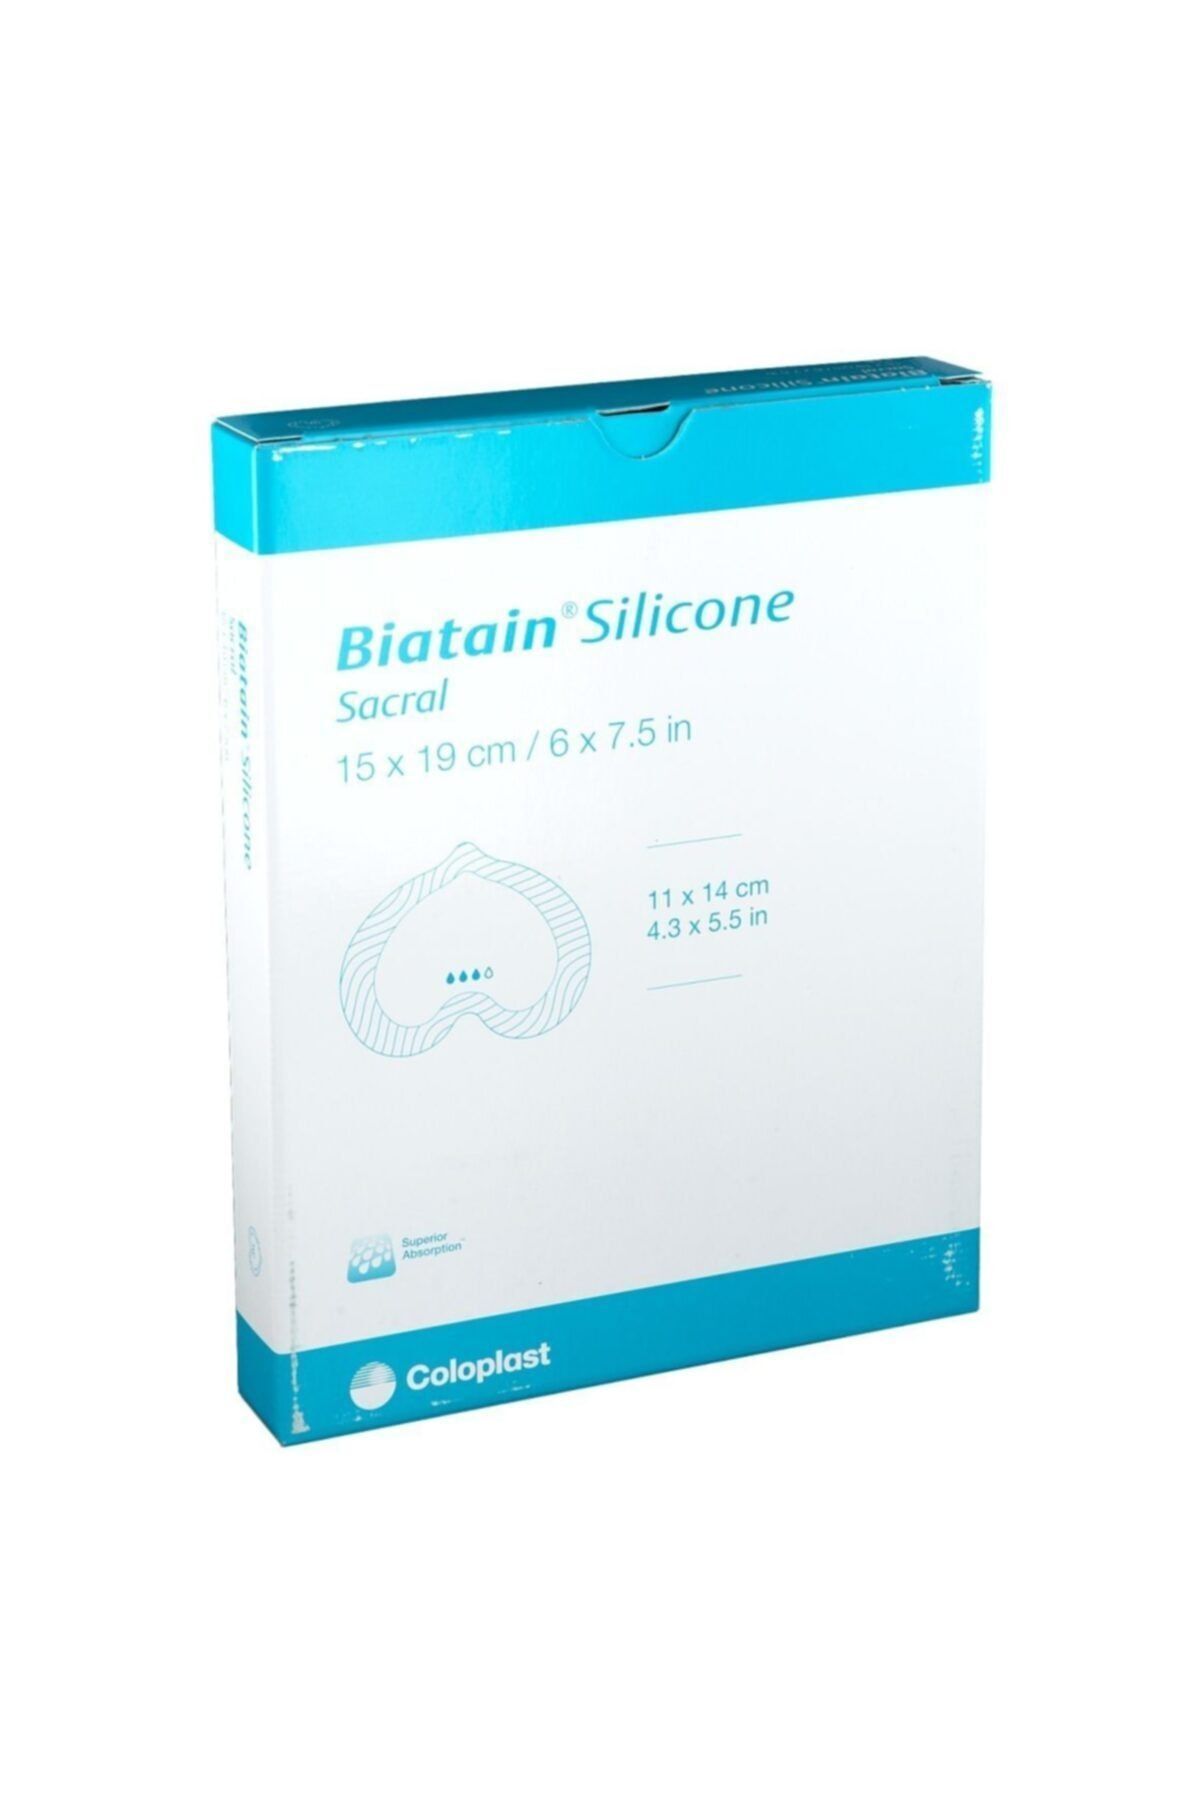 Coloplast Biatain Silicone Sacral 15x19 / 6x 7.5 In (1 Adet)